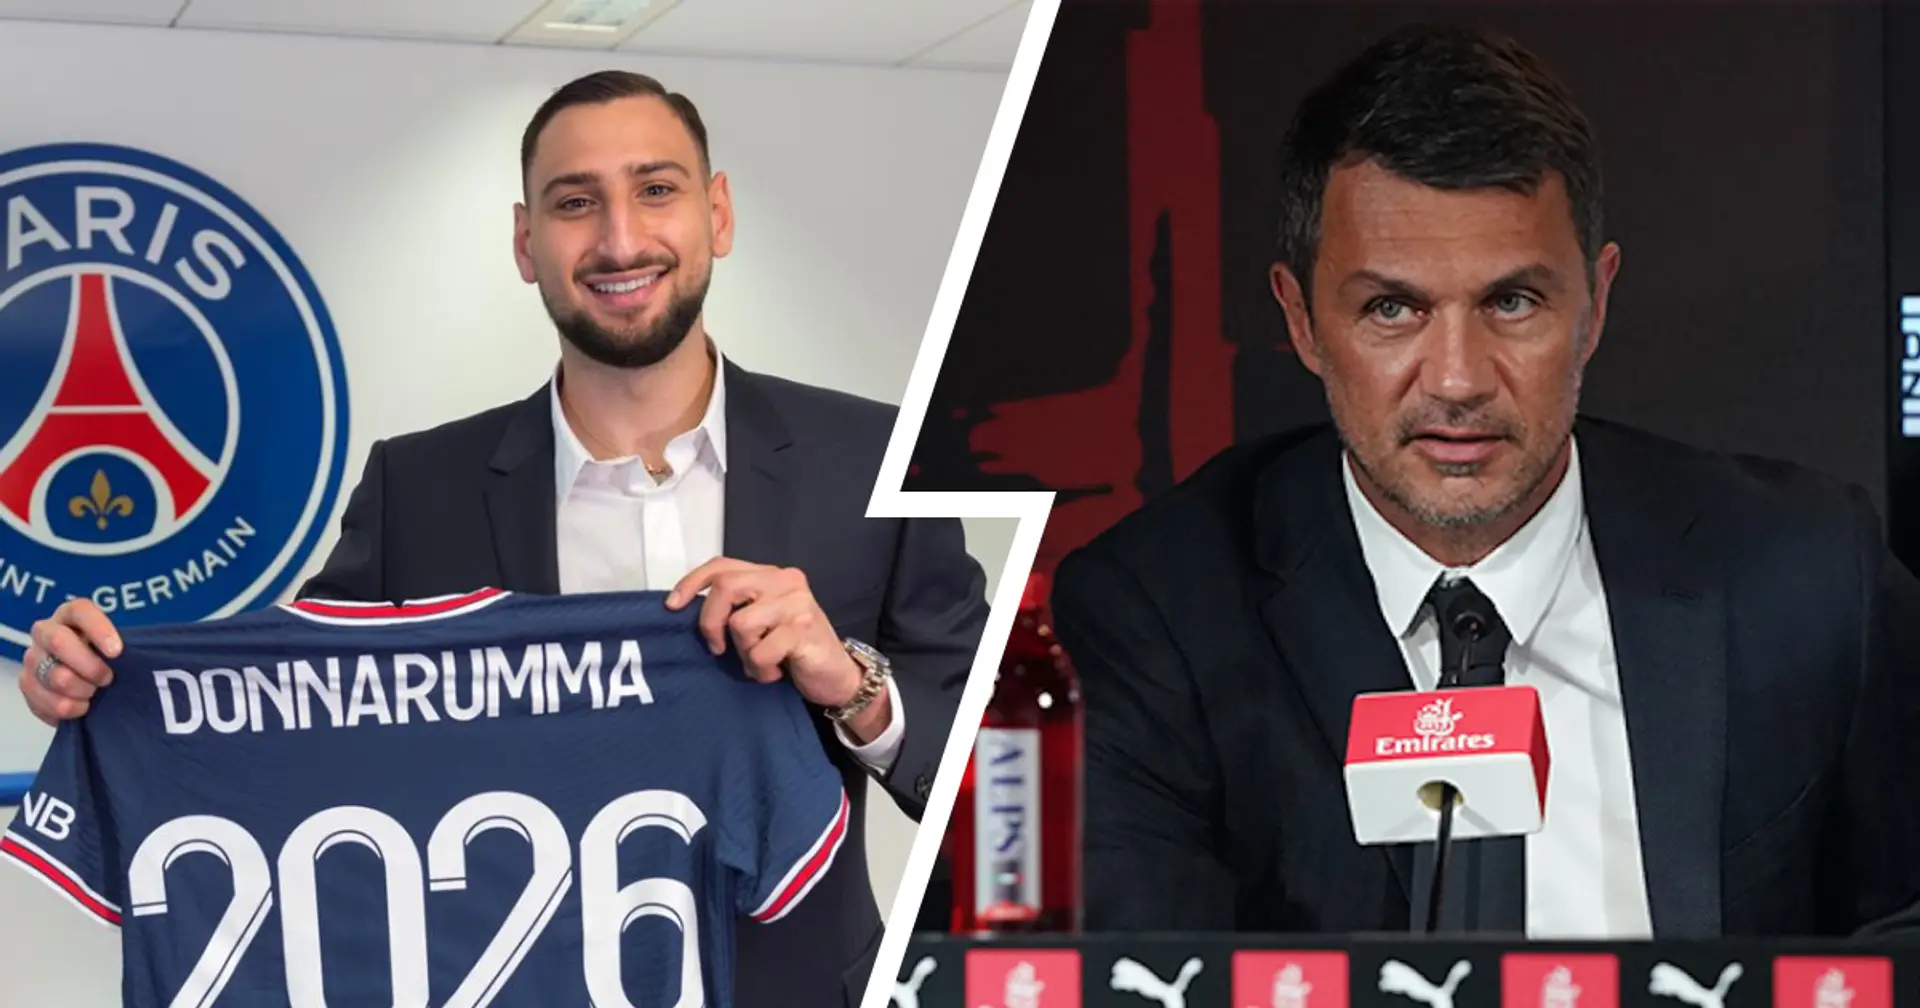 Paolo Maldini: 'In an ideal world, the only motivation of a player like Donnarumma should be passion'